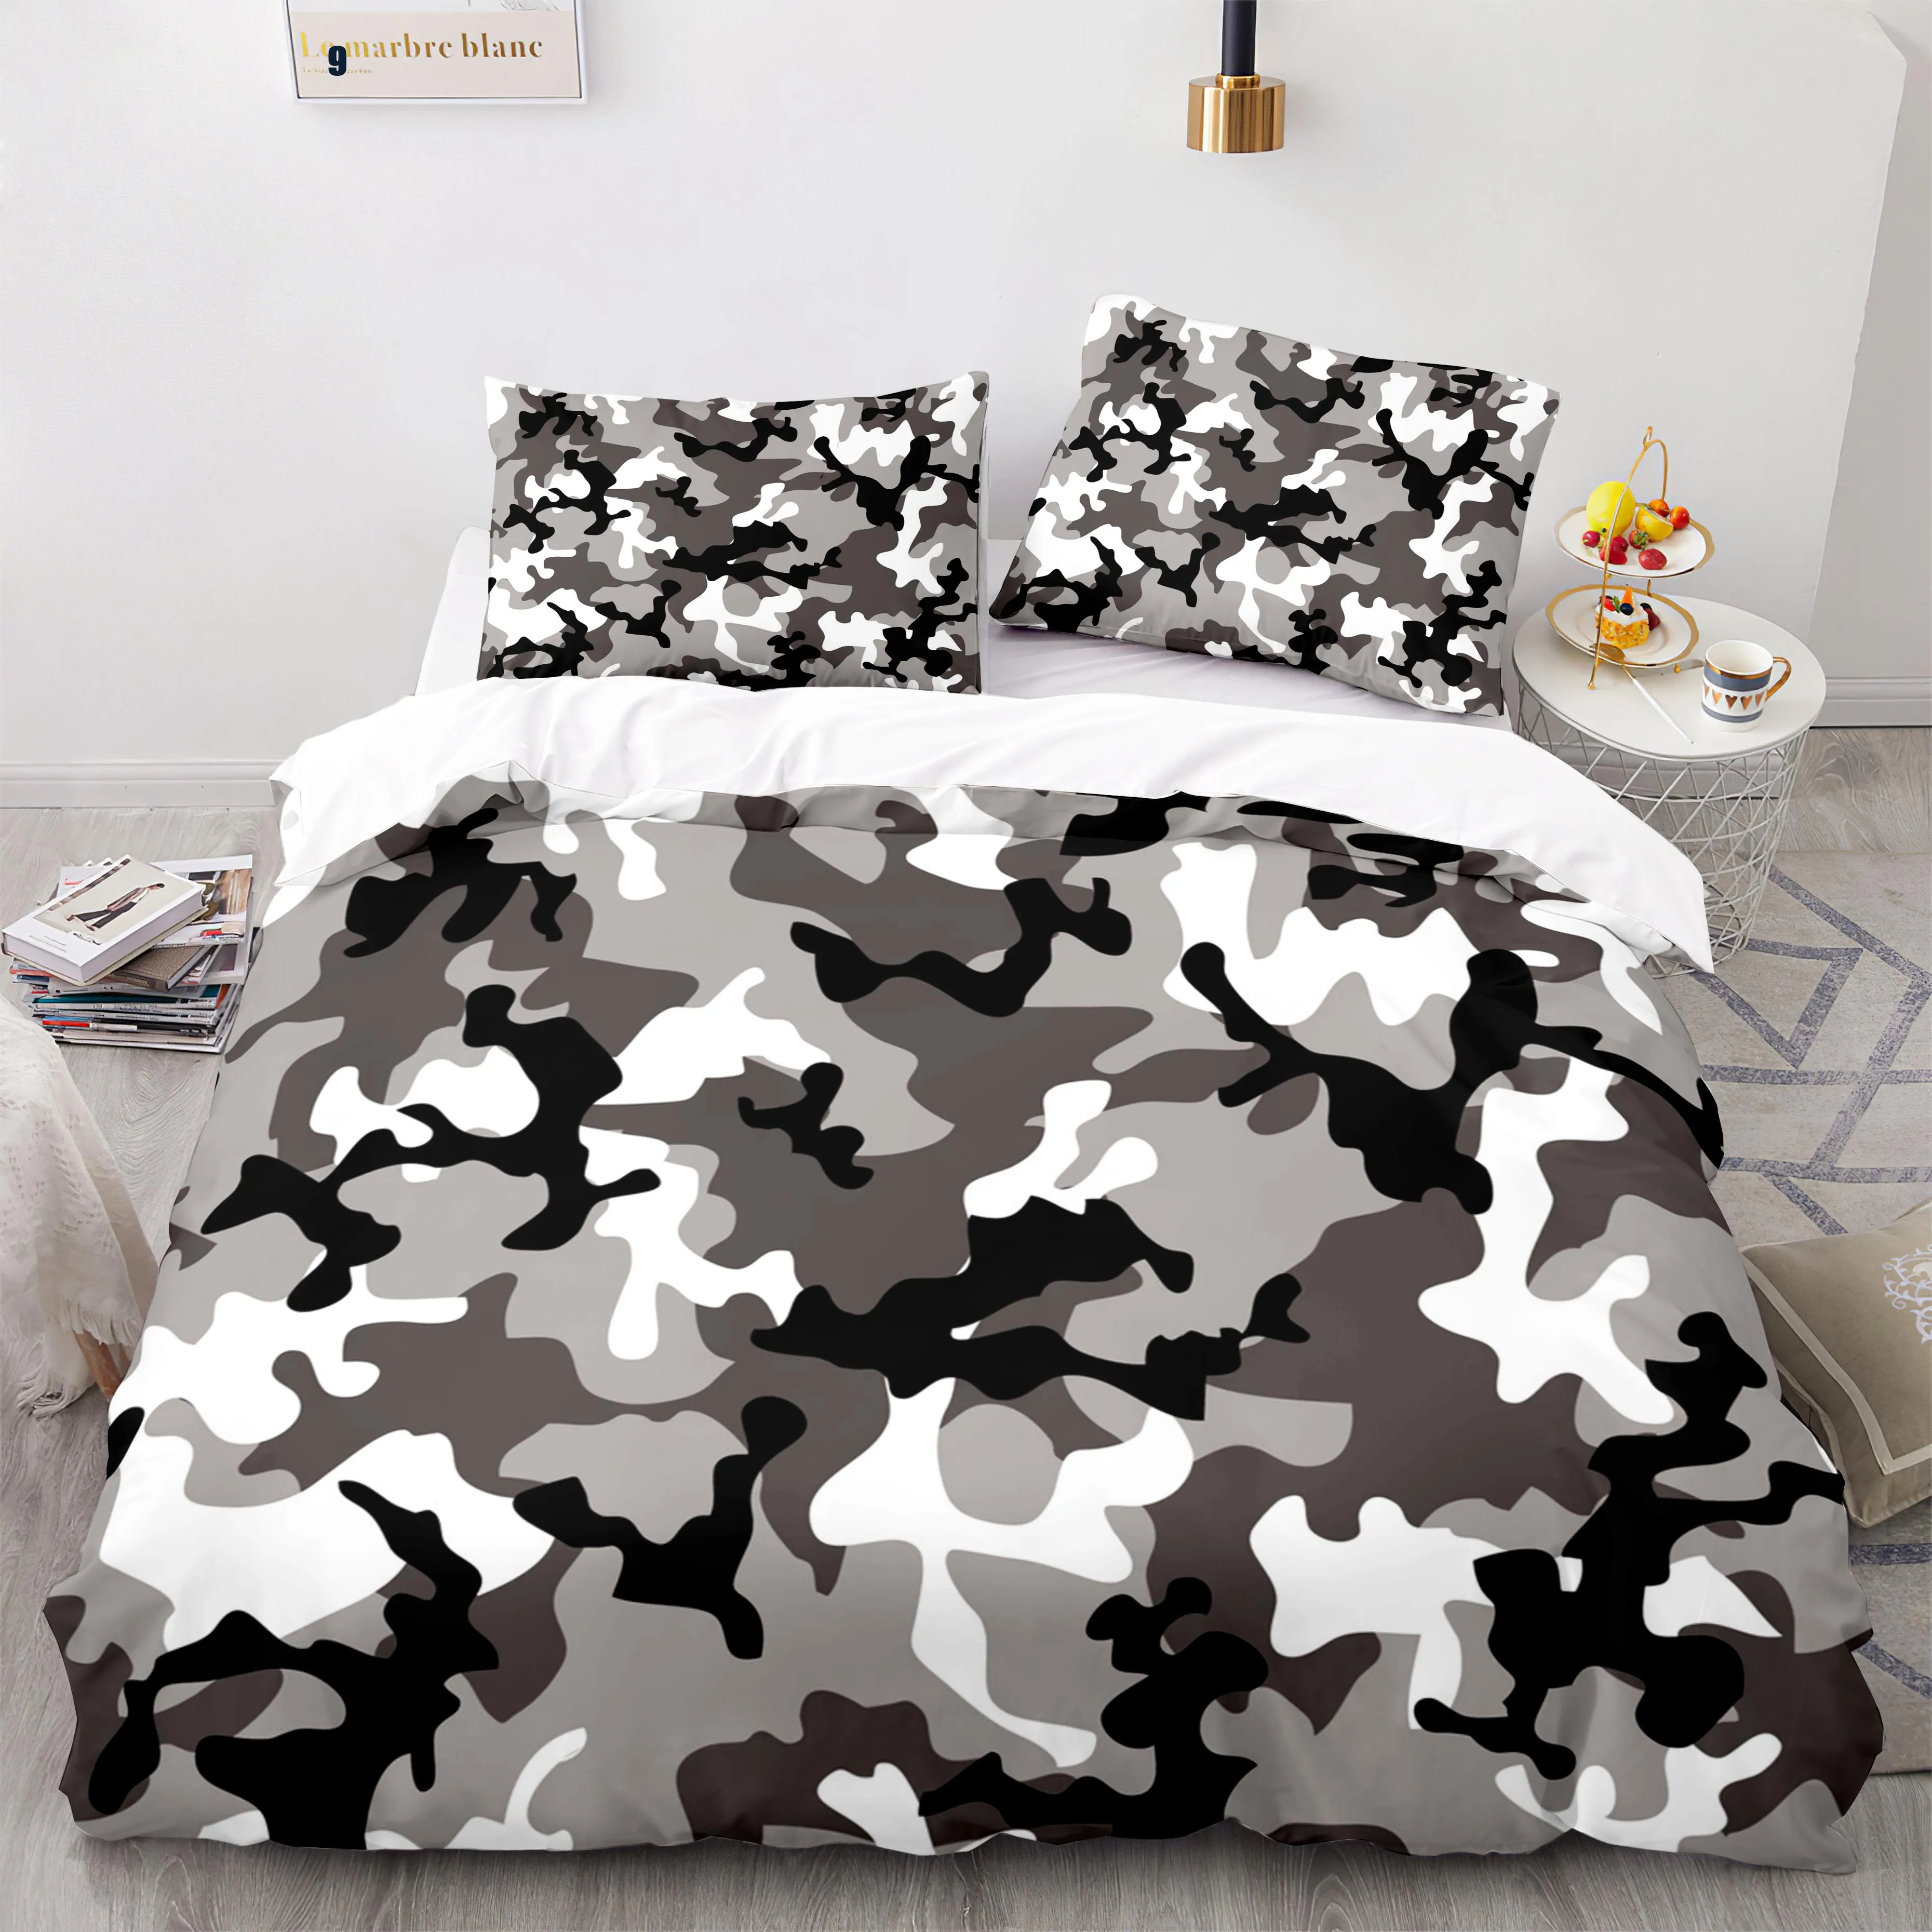 Camouflage 3D Printed Bedding Set Duvet Covers Pillowcases Comforter Bedding Set Bedclothes Bed Linen 